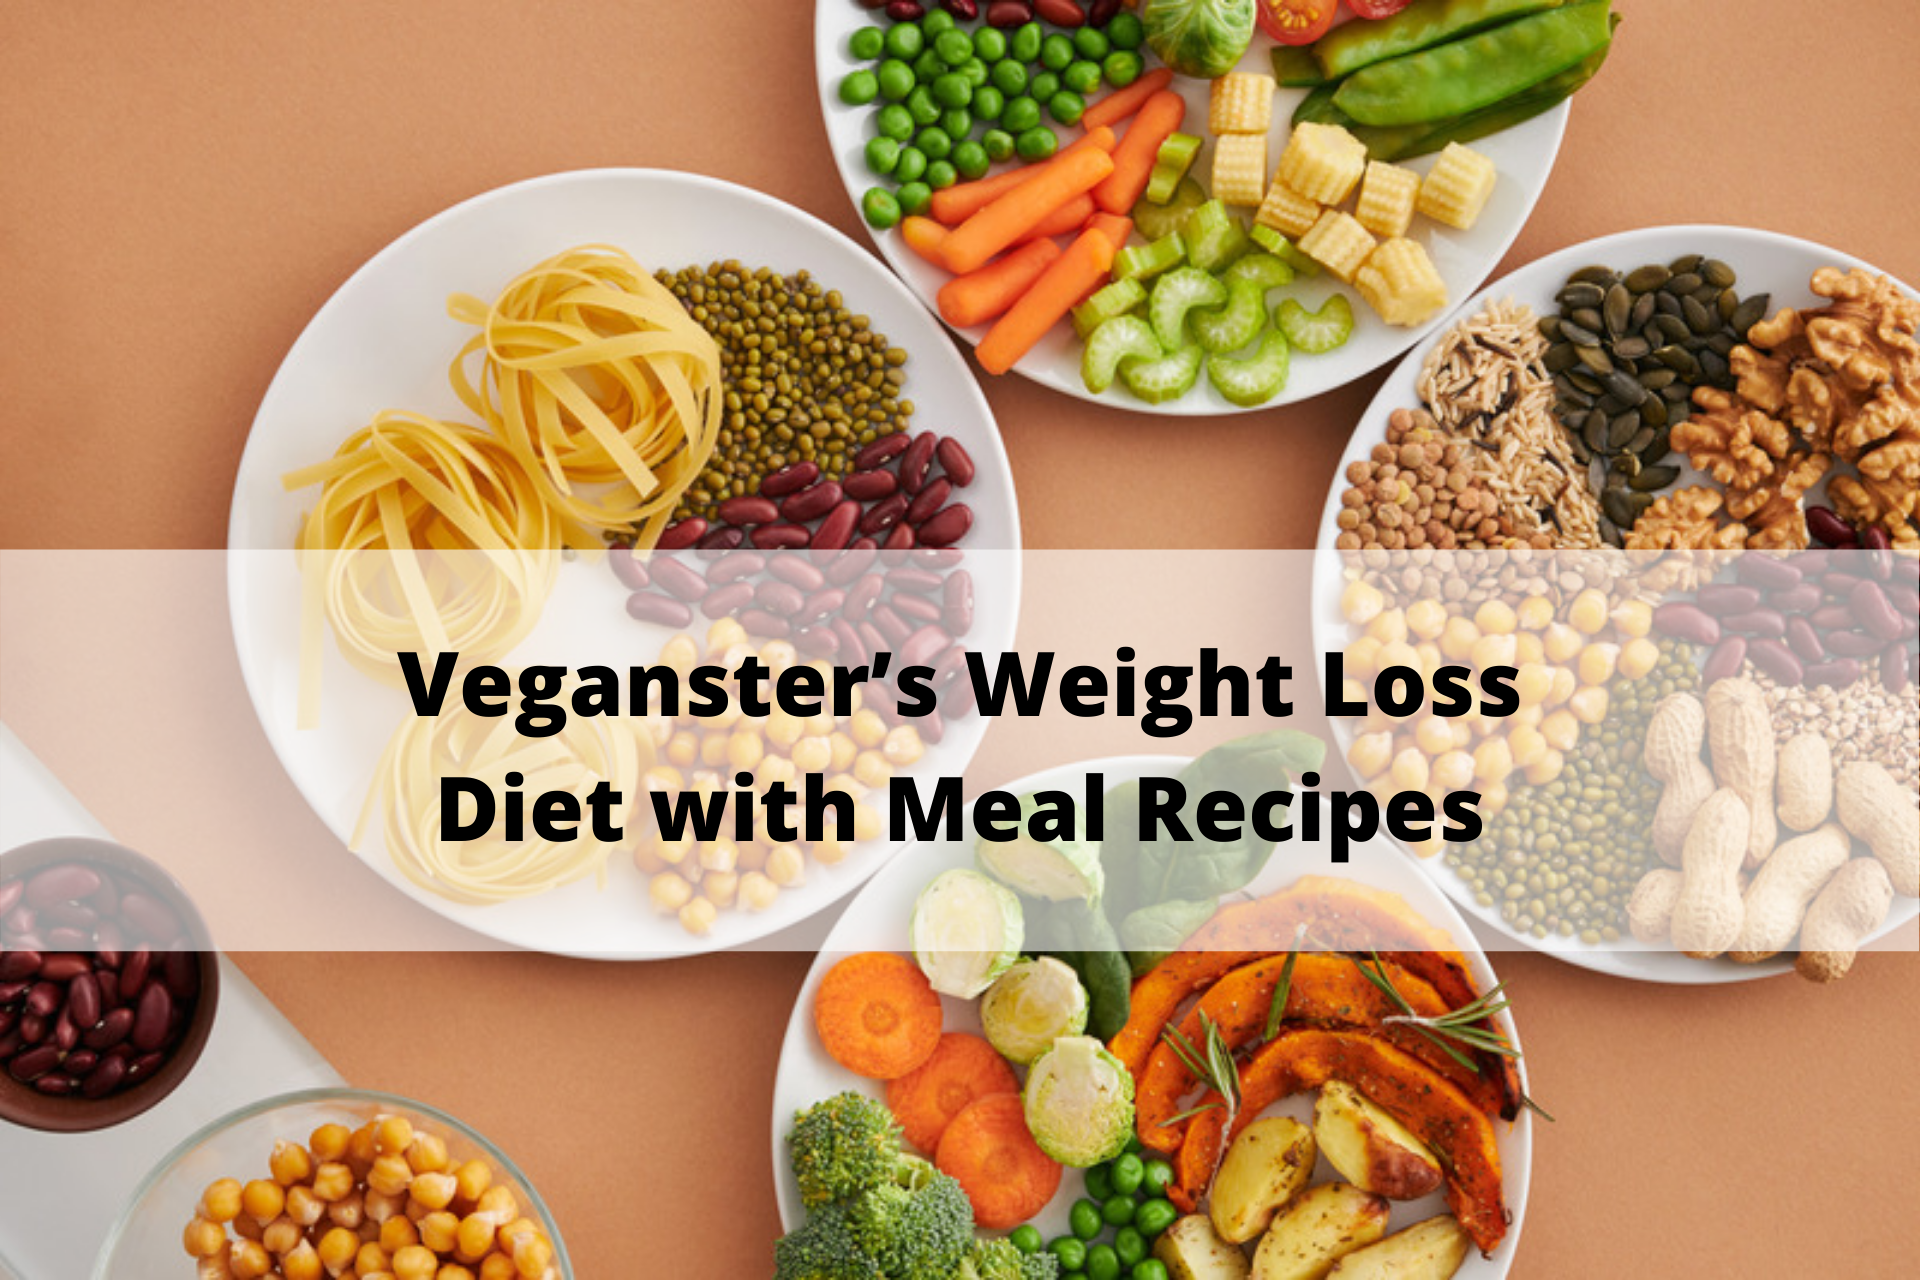 Every 3 hours a meal, Lose a pound a day!!! Veganster’s Weight Loss Diet with Meal Recipes